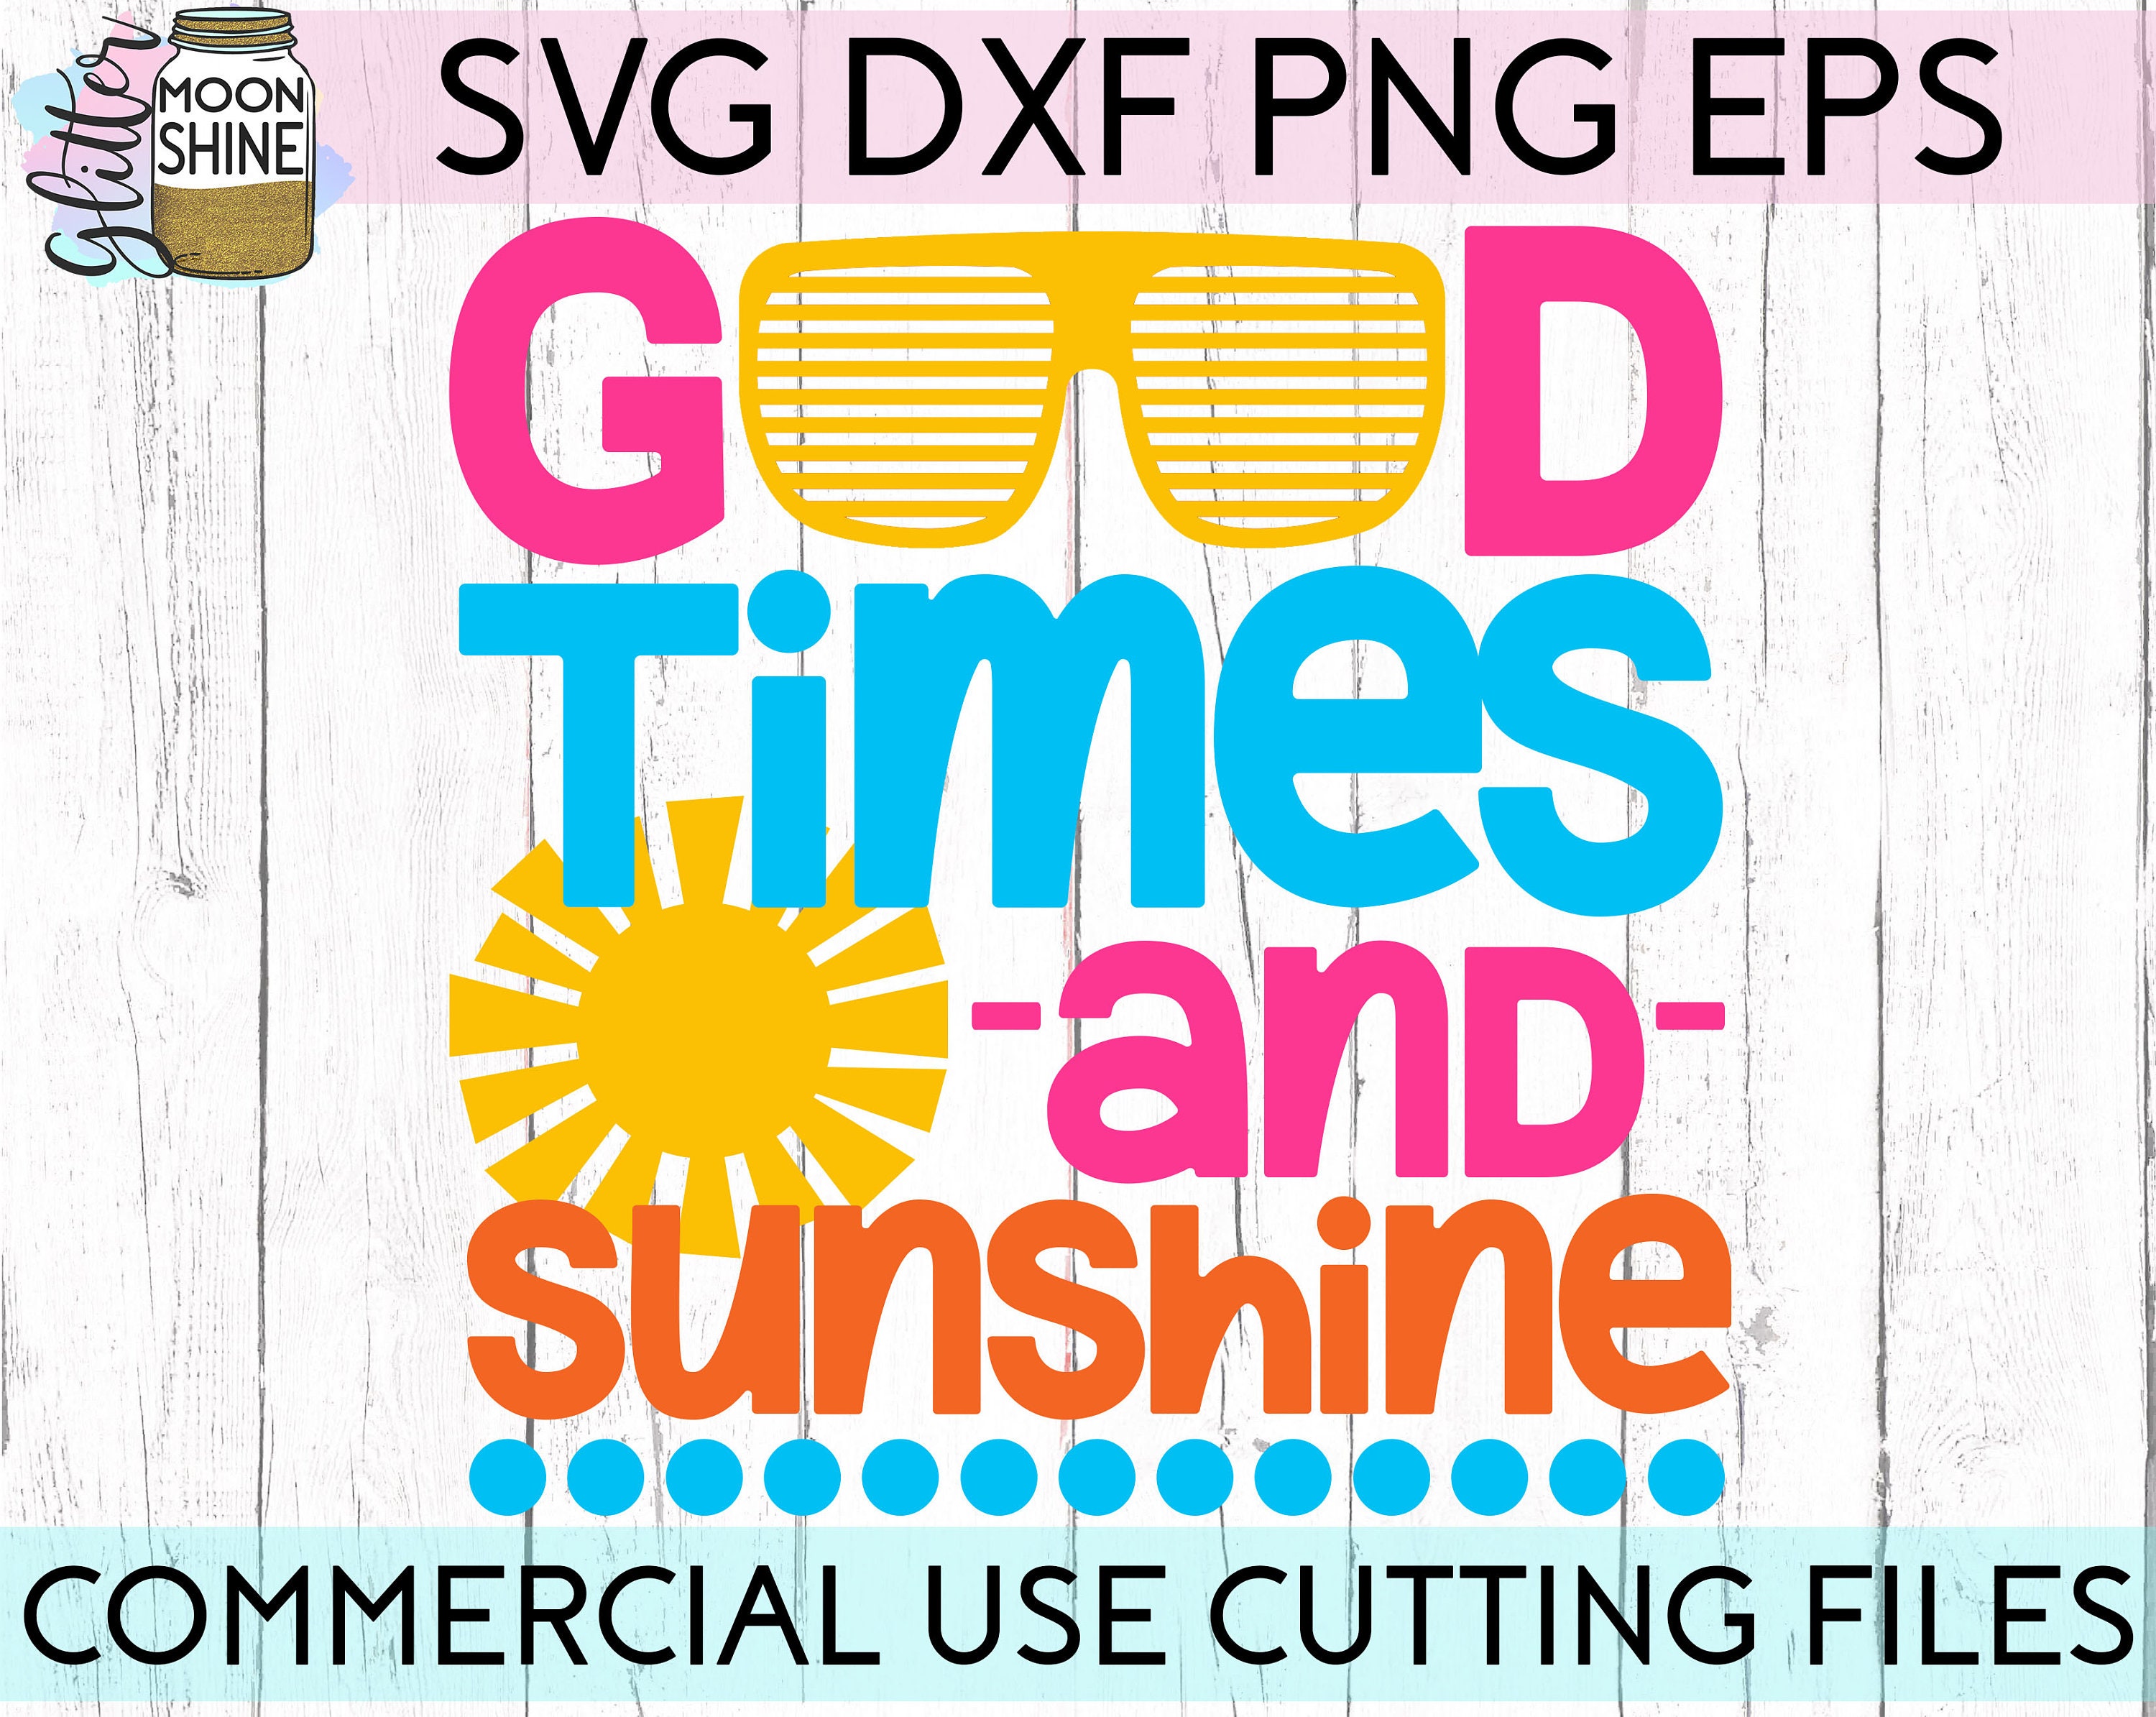 Good Times and Sunshine Svg Dxf Eps Png Files for Cutting | Etsy